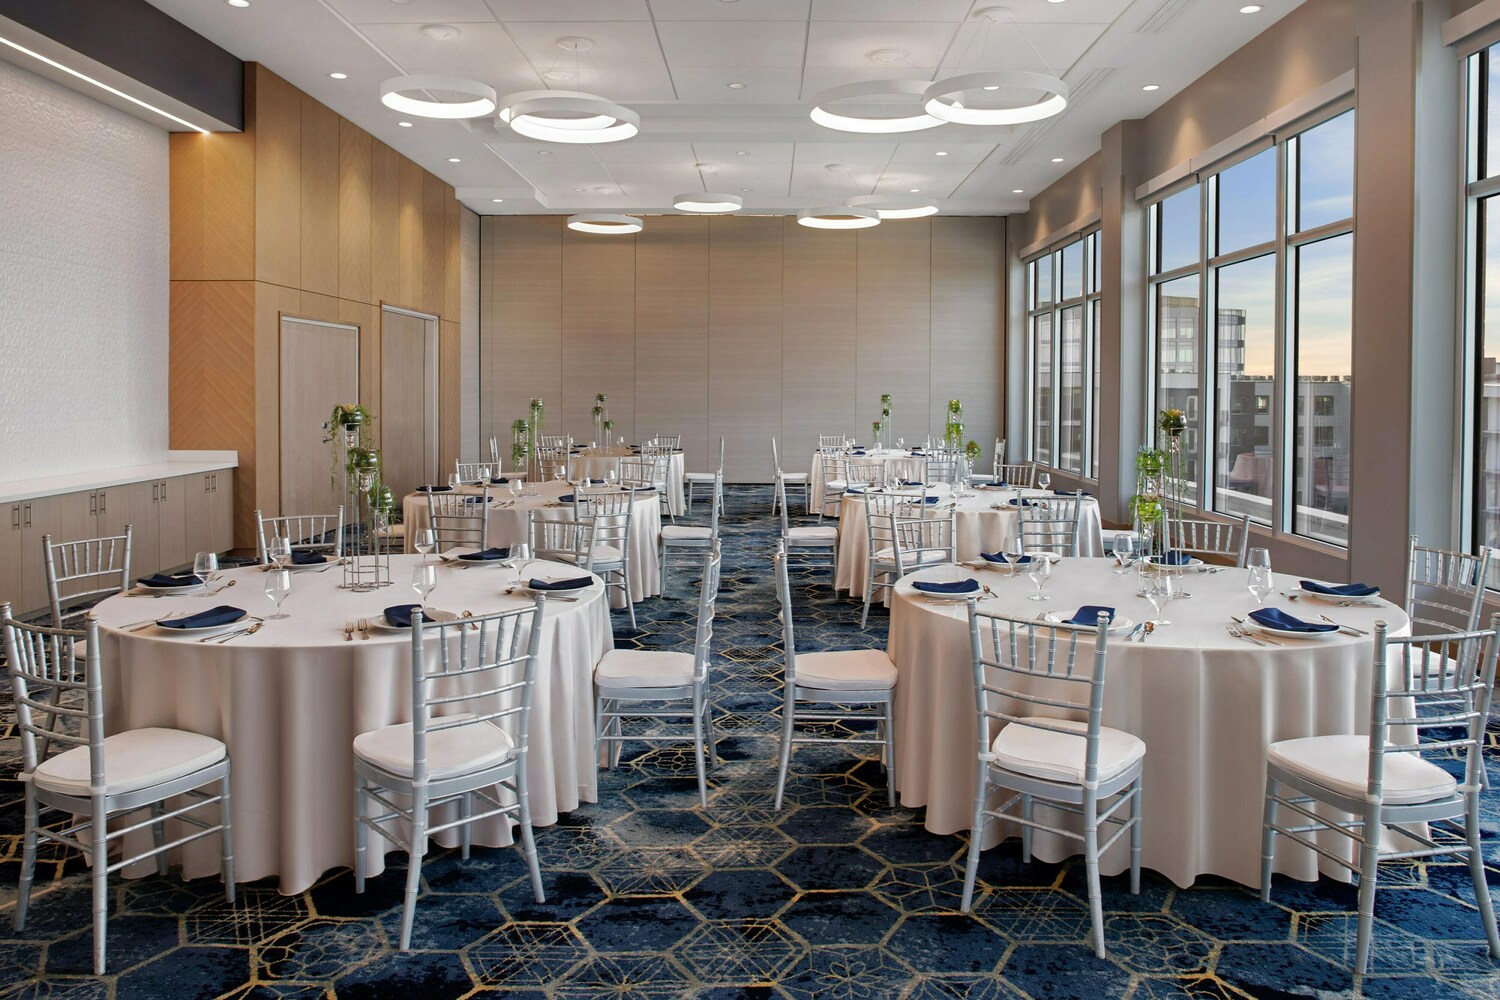 Beautiful floor to ceiling windows showcase this beautiful Ballroom with over 2,300 sq ft of wedding or event space.